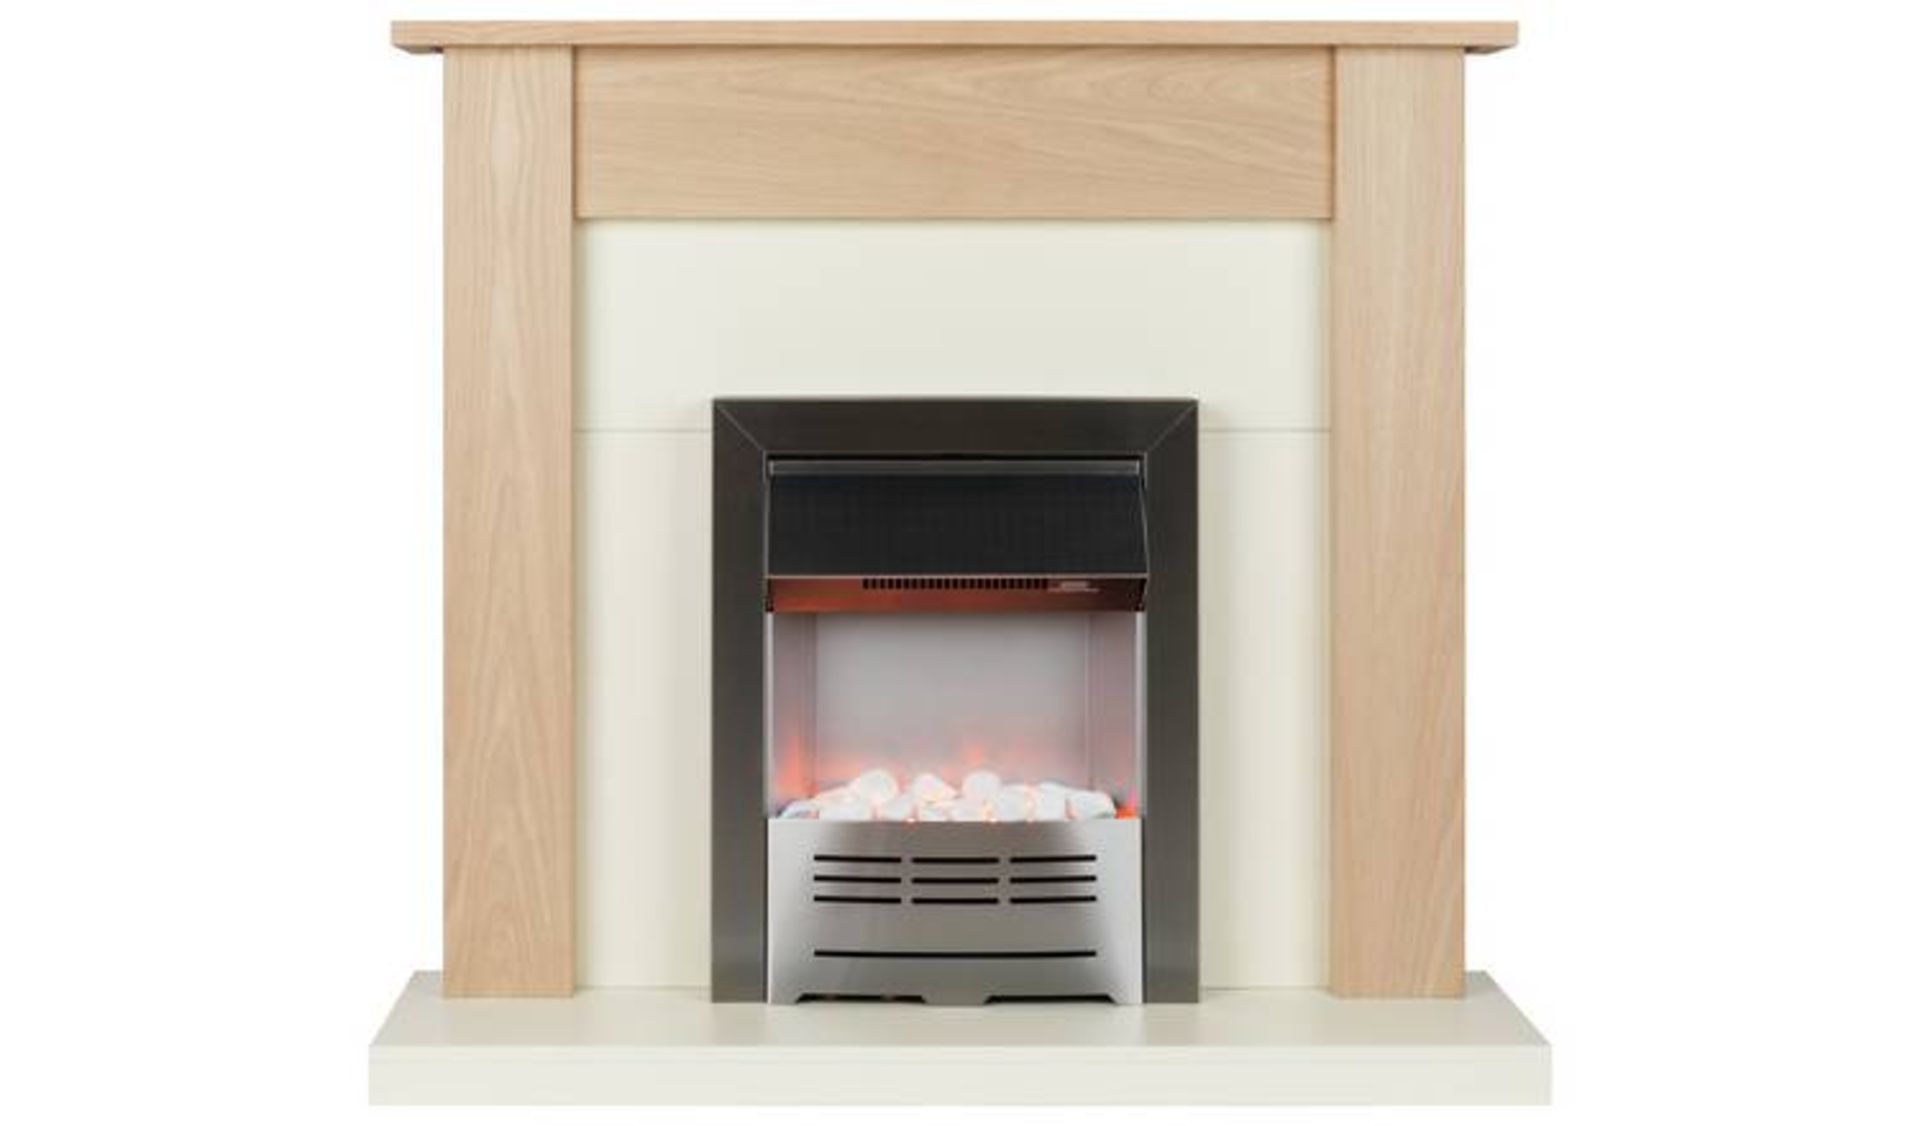 BRAND NEW BOXED Beldray Earlesworth 2kW Electric Fire Suite - Oak & Ivory. RRP £229.99. The Ea... - Image 2 of 2